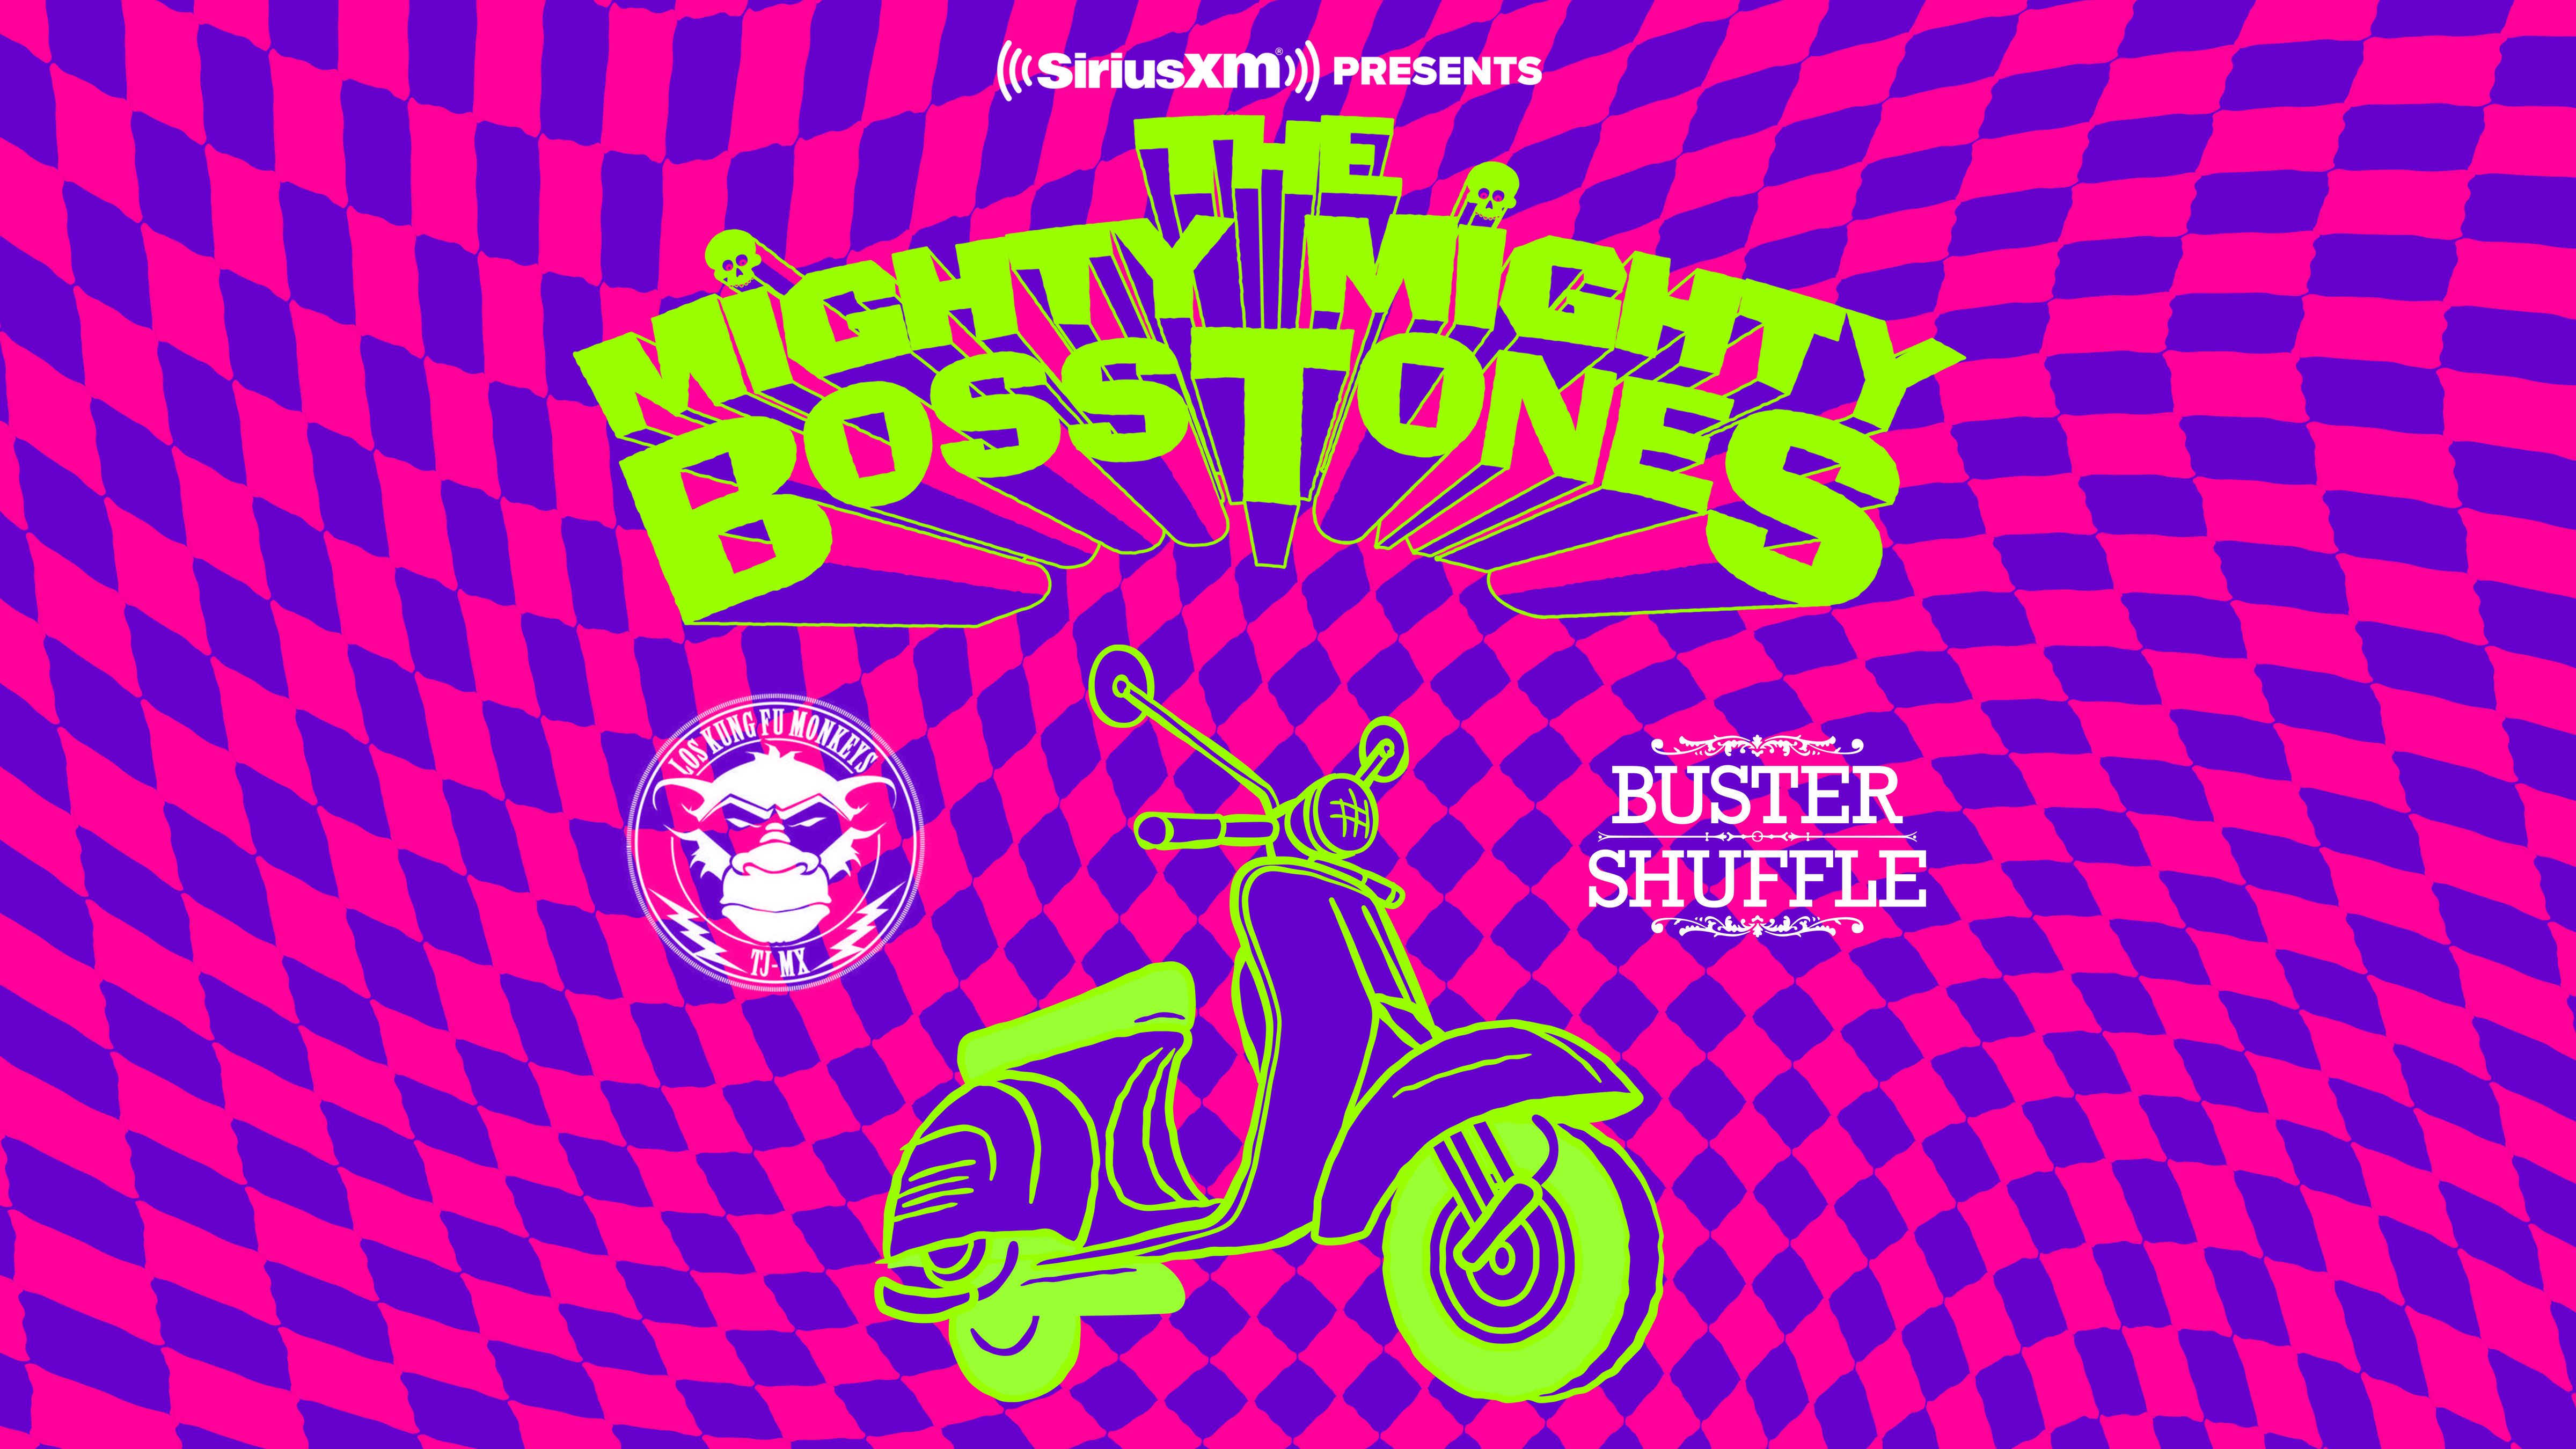 the mighty mighty bosstones tour